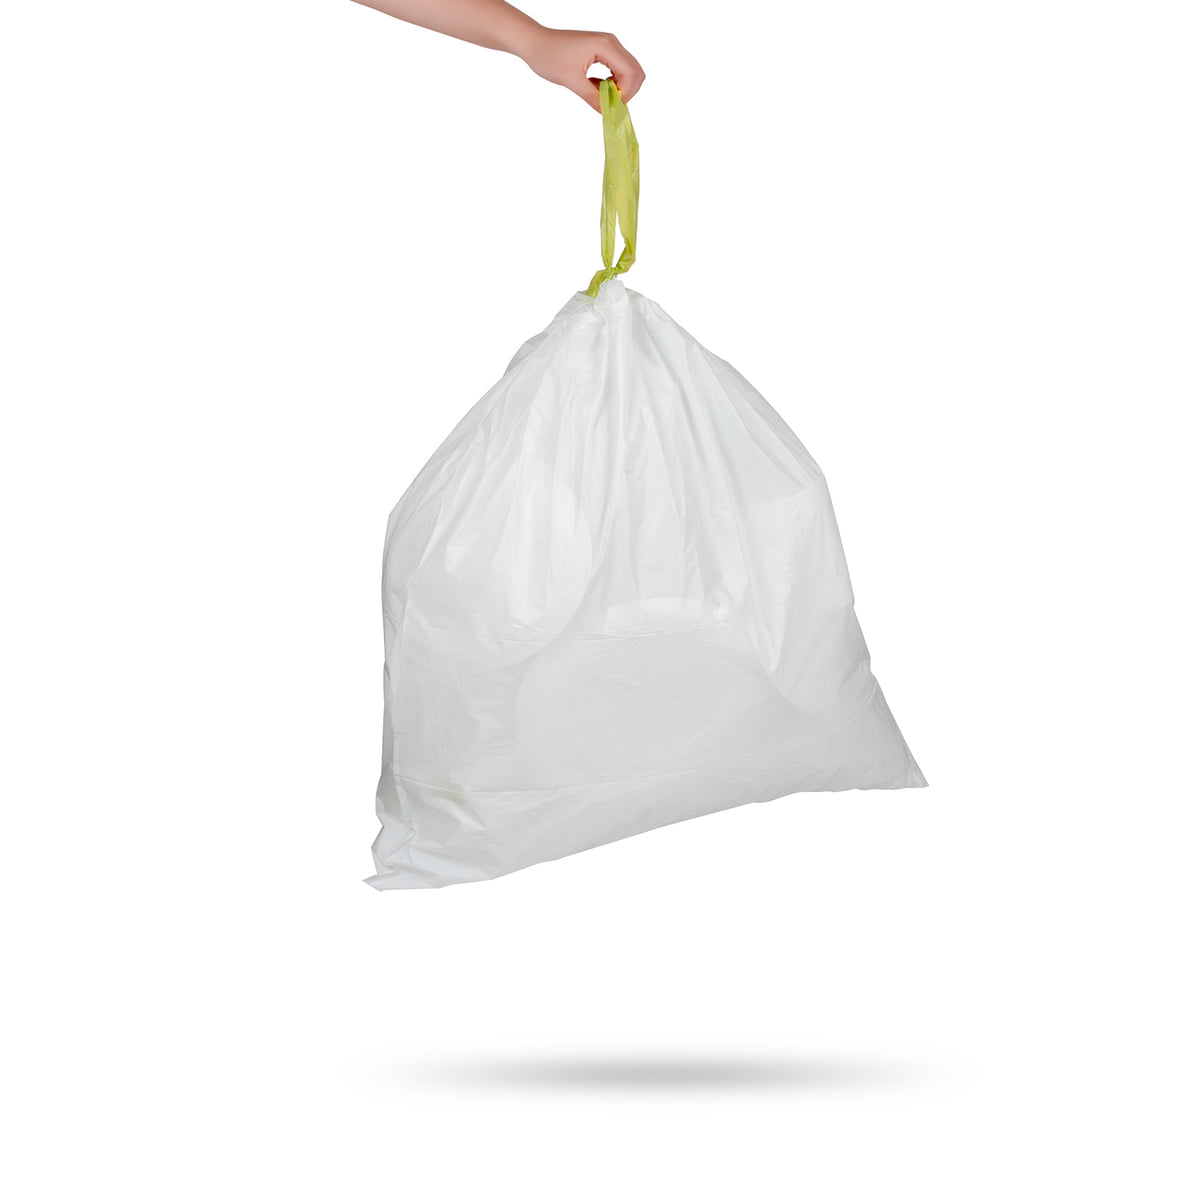 Bomgaars : Jadcore Drawstring Kitchen Bags, White, 40-Count